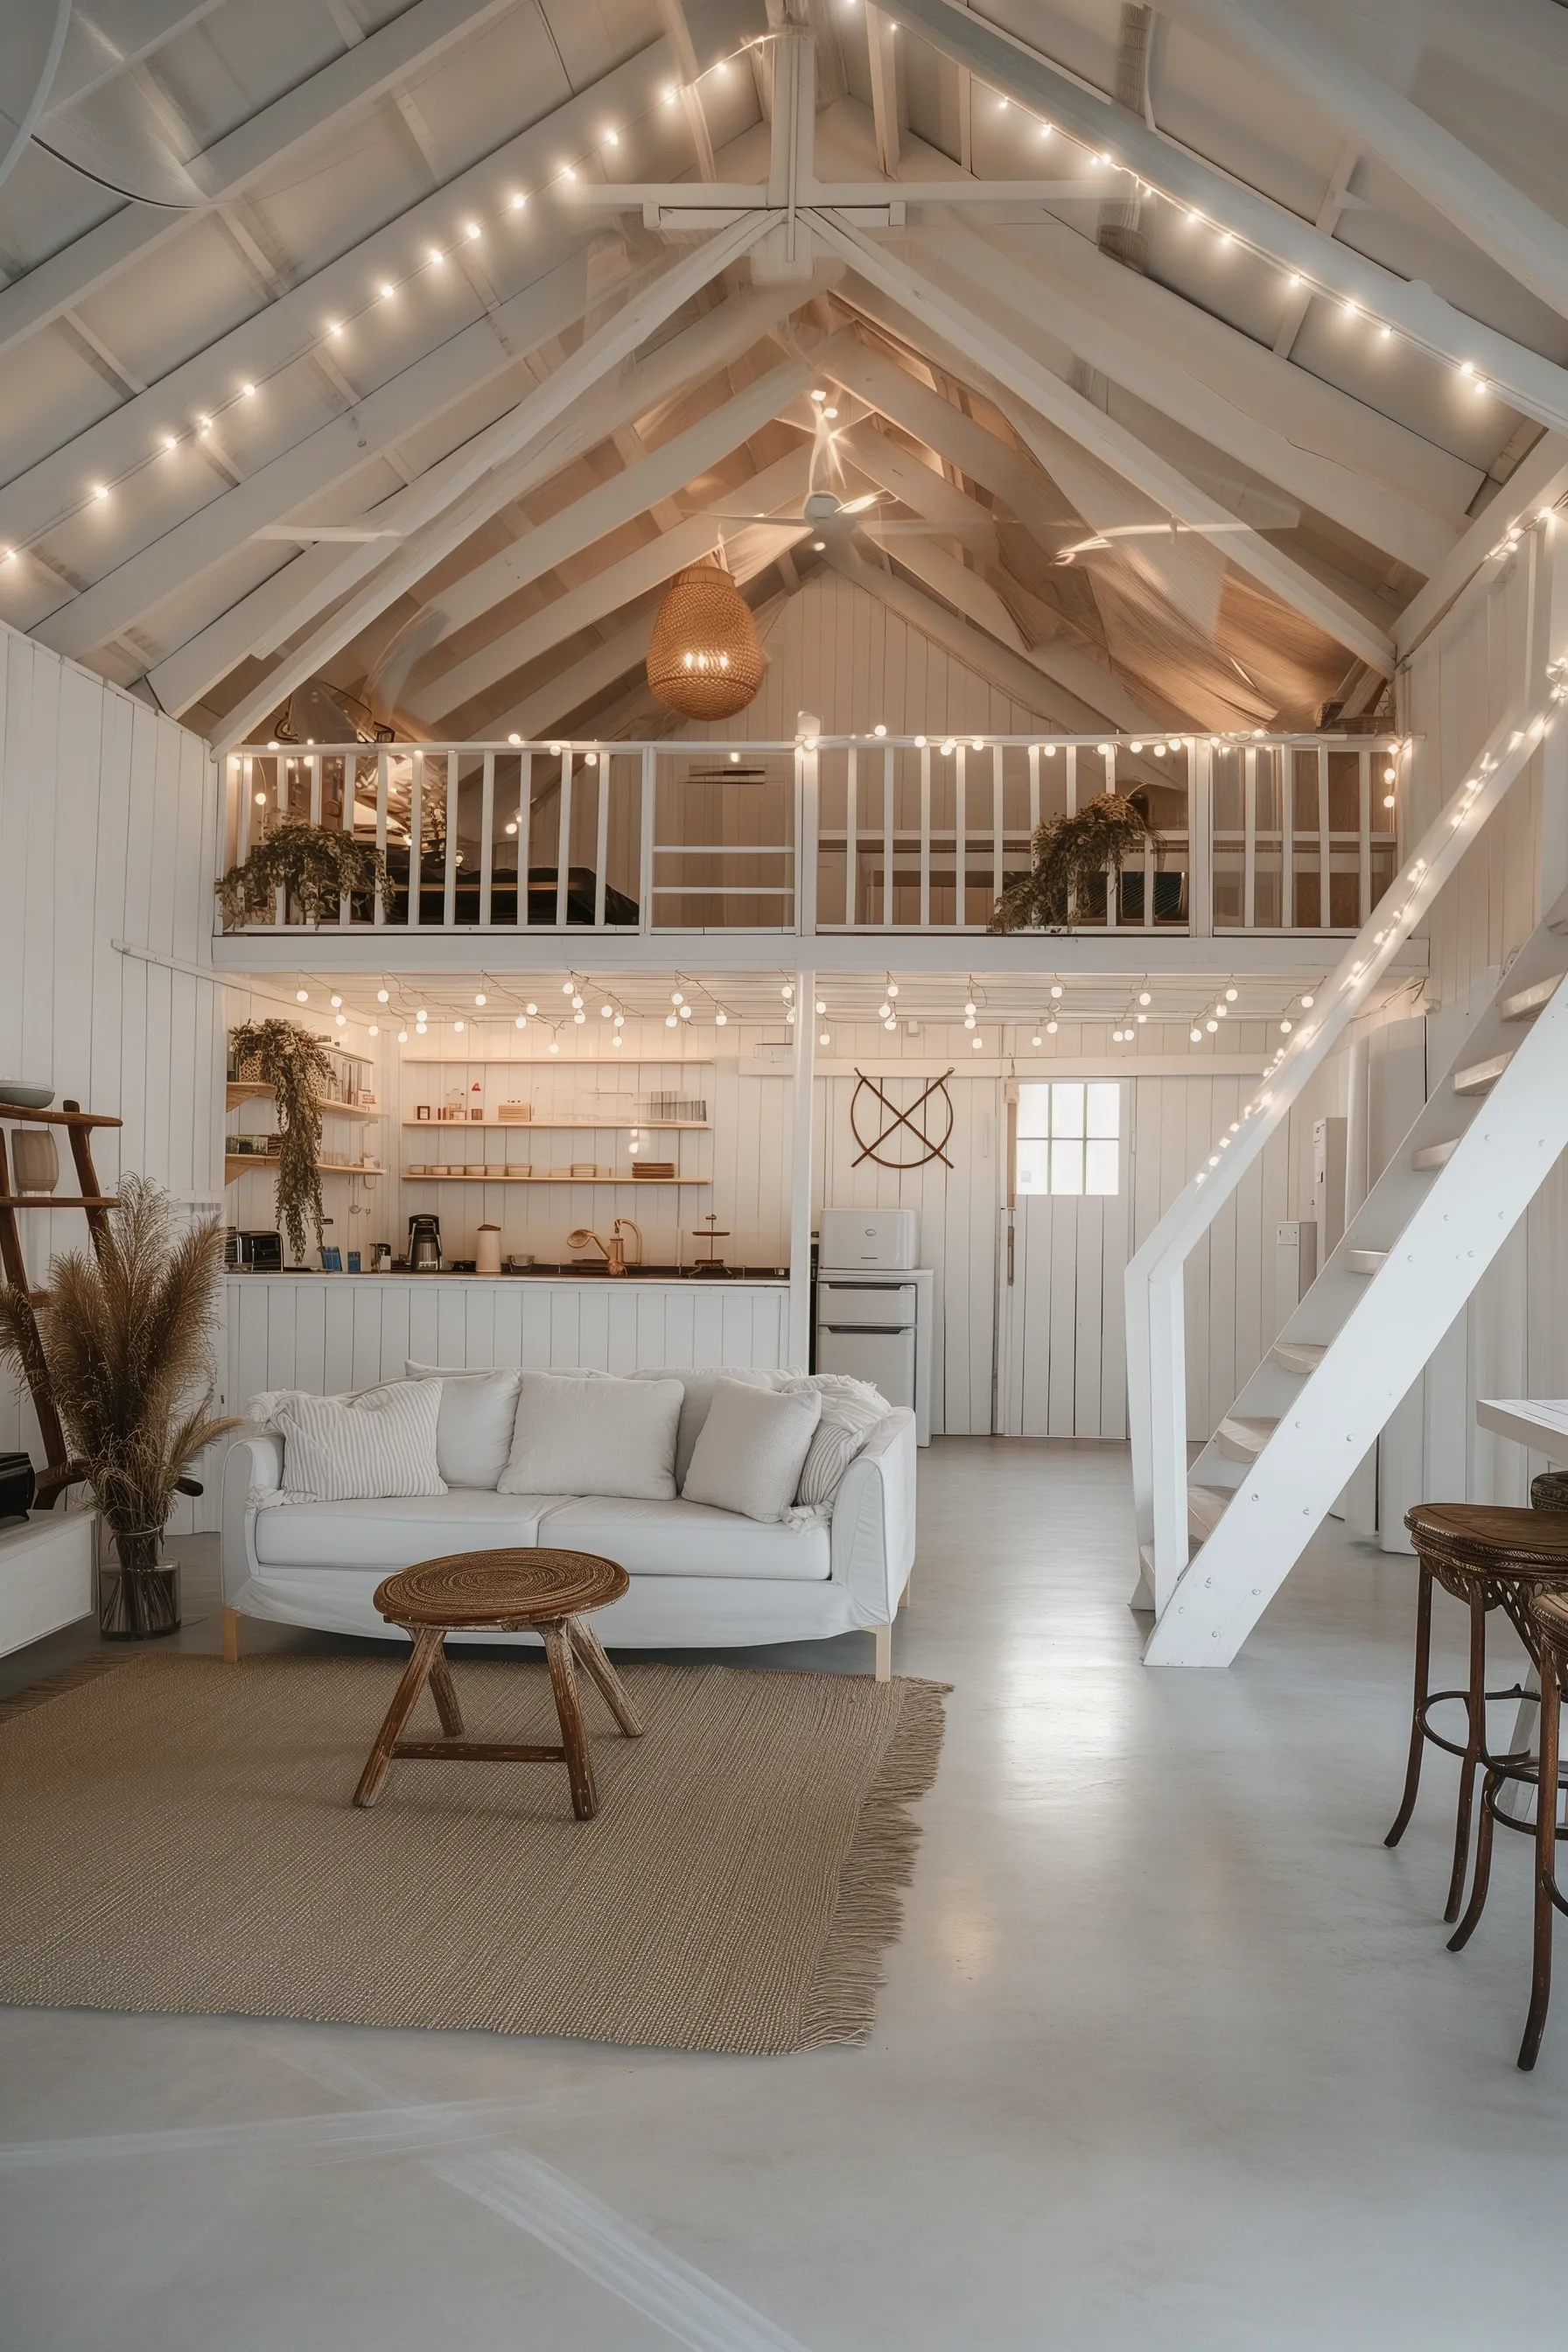 A white man cave pole barn with high ceilings